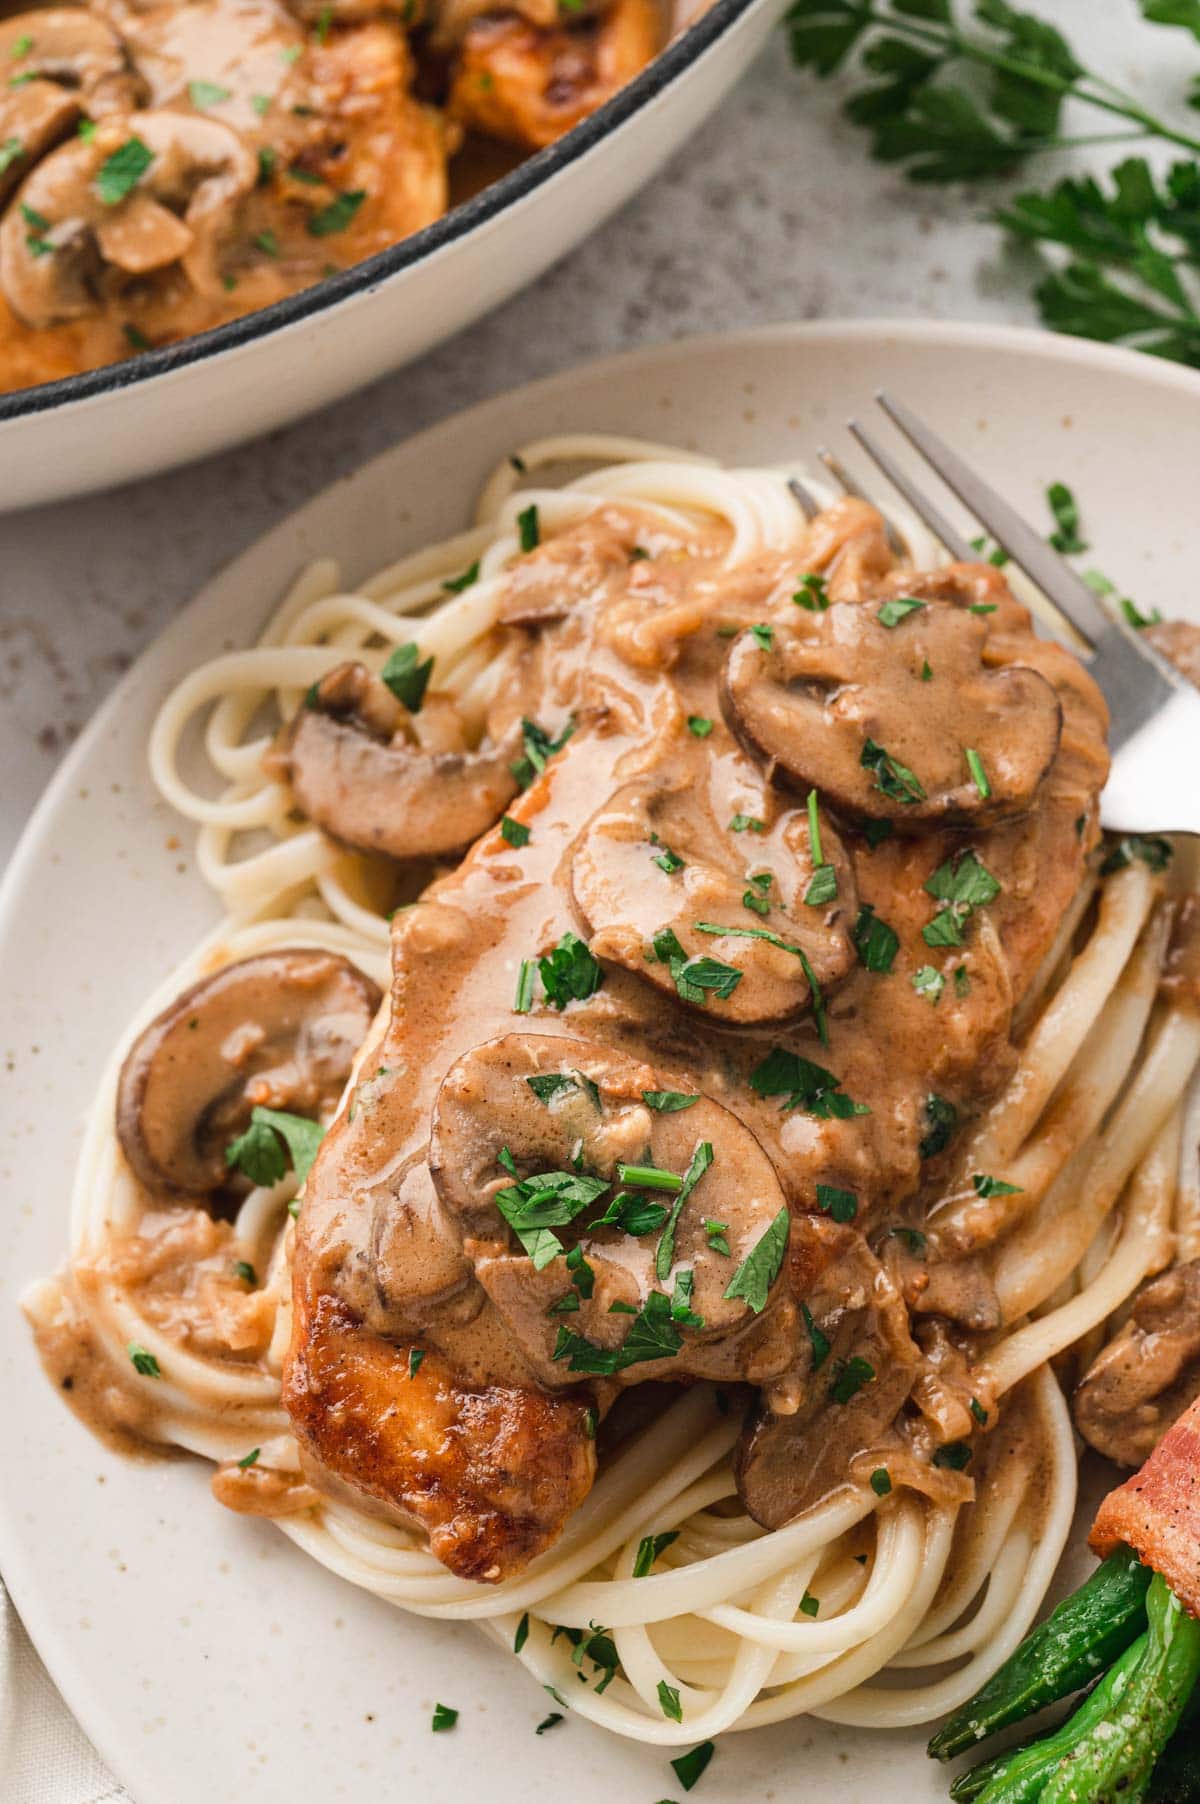 Chicken breast on a bed of noodles with a creamy mushroom sauce.